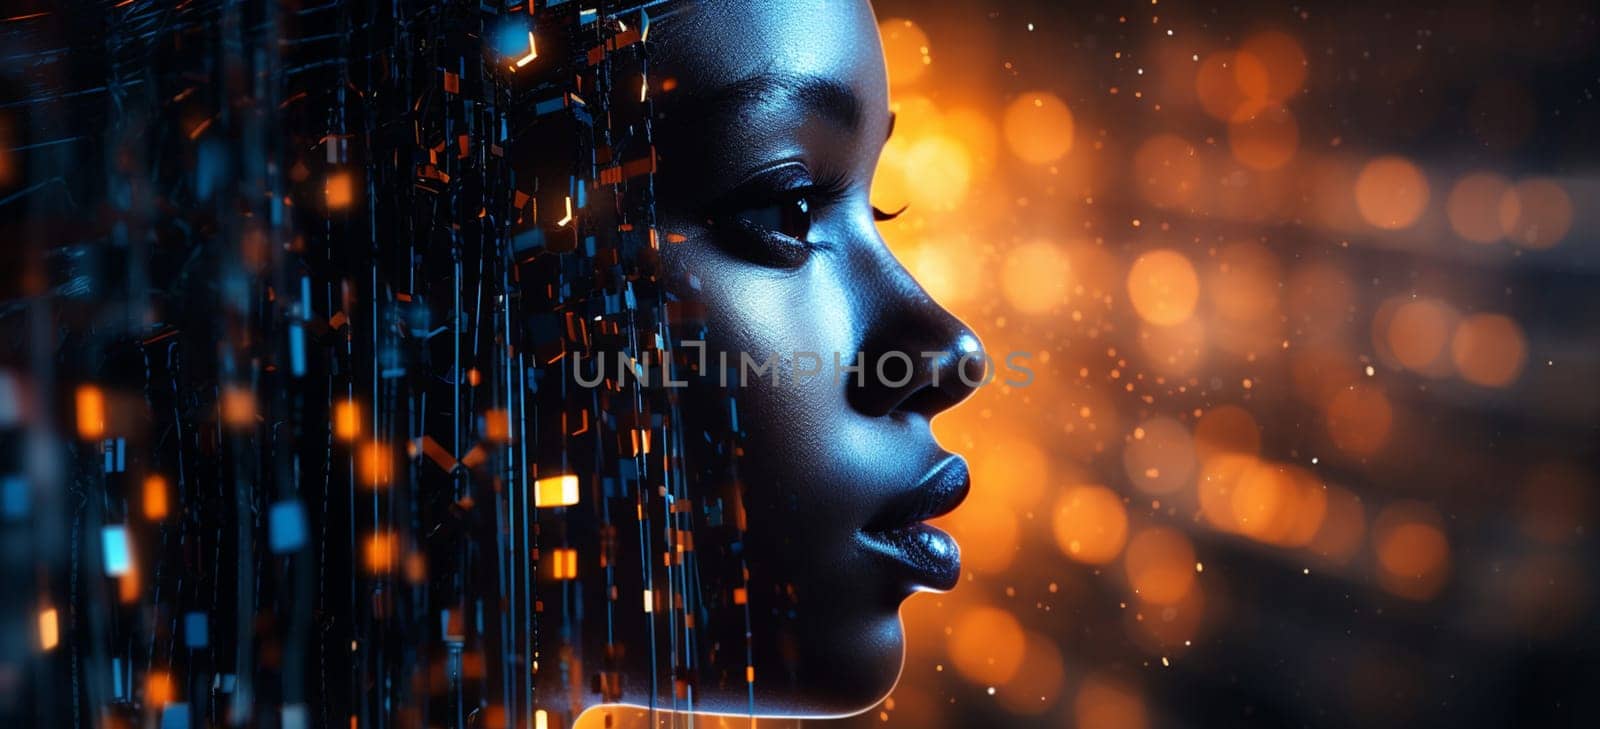 Futuristic robotic woman side view, Beauty portrait of African American cyborg girl. High quality photo